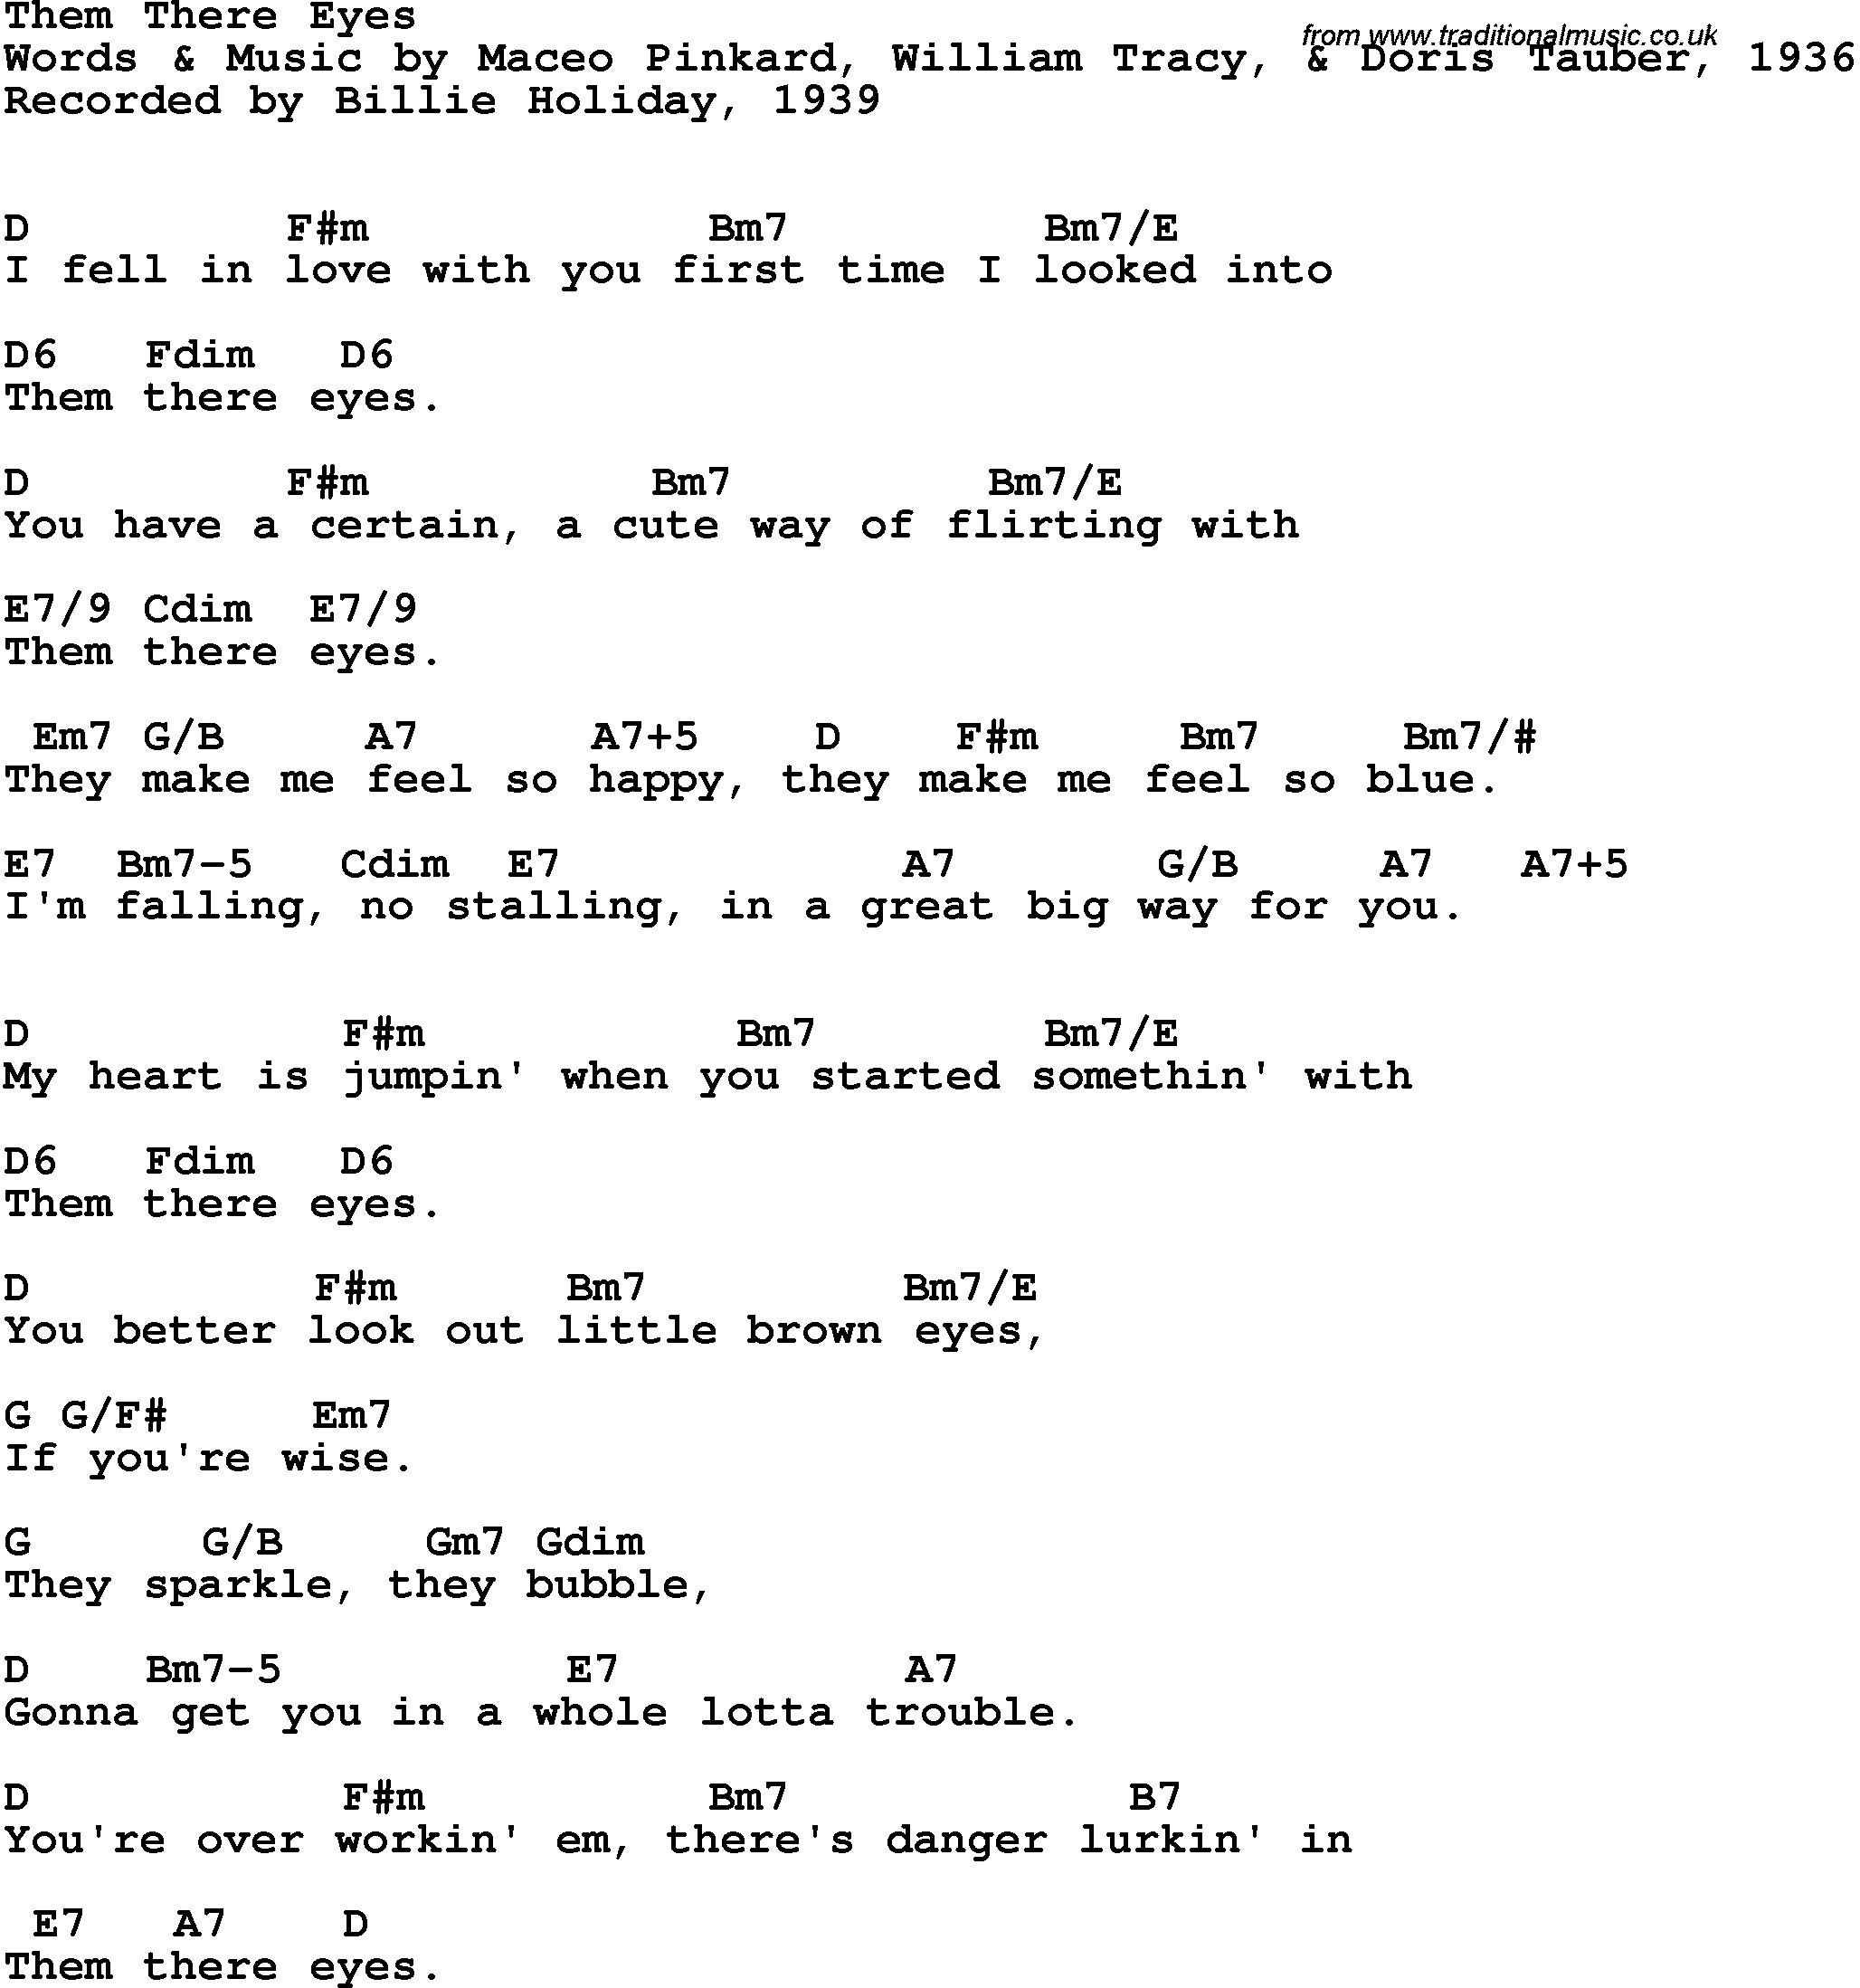 Song Lyrics with guitar chords for Them There Eyes - Billie Holiday, 1939